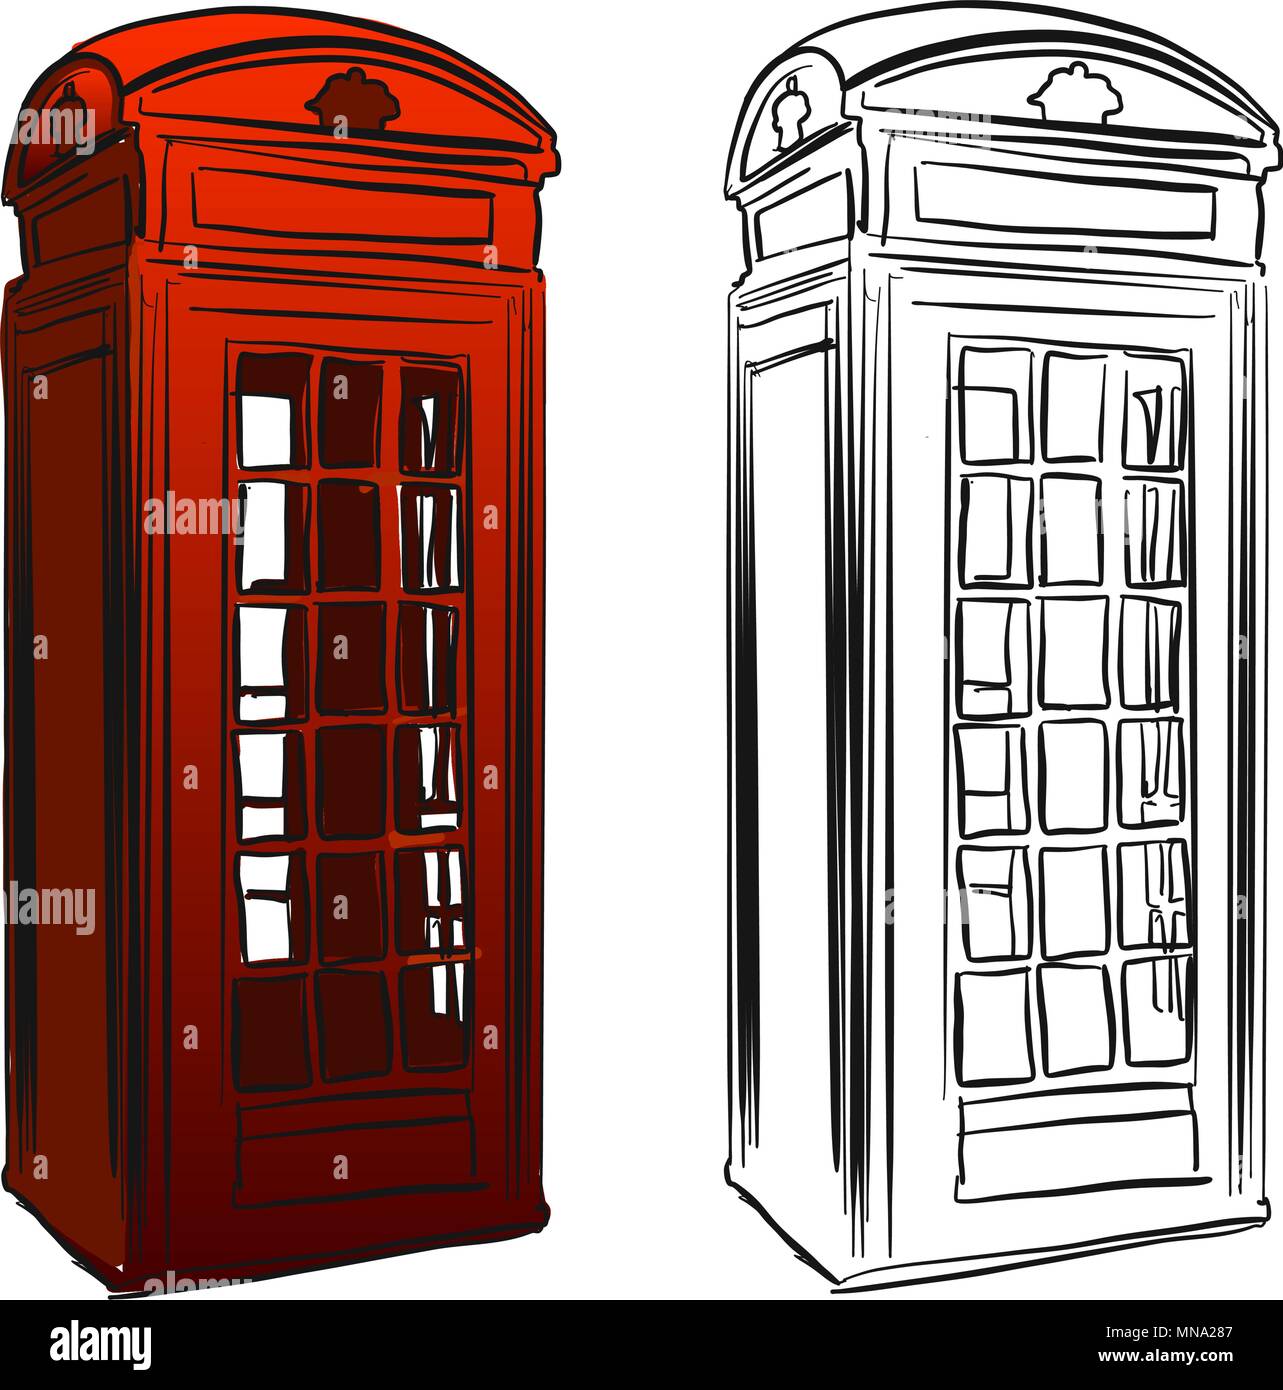 428 Phone Booth Sketch Images, Stock Photos & Vectors | Shutterstock